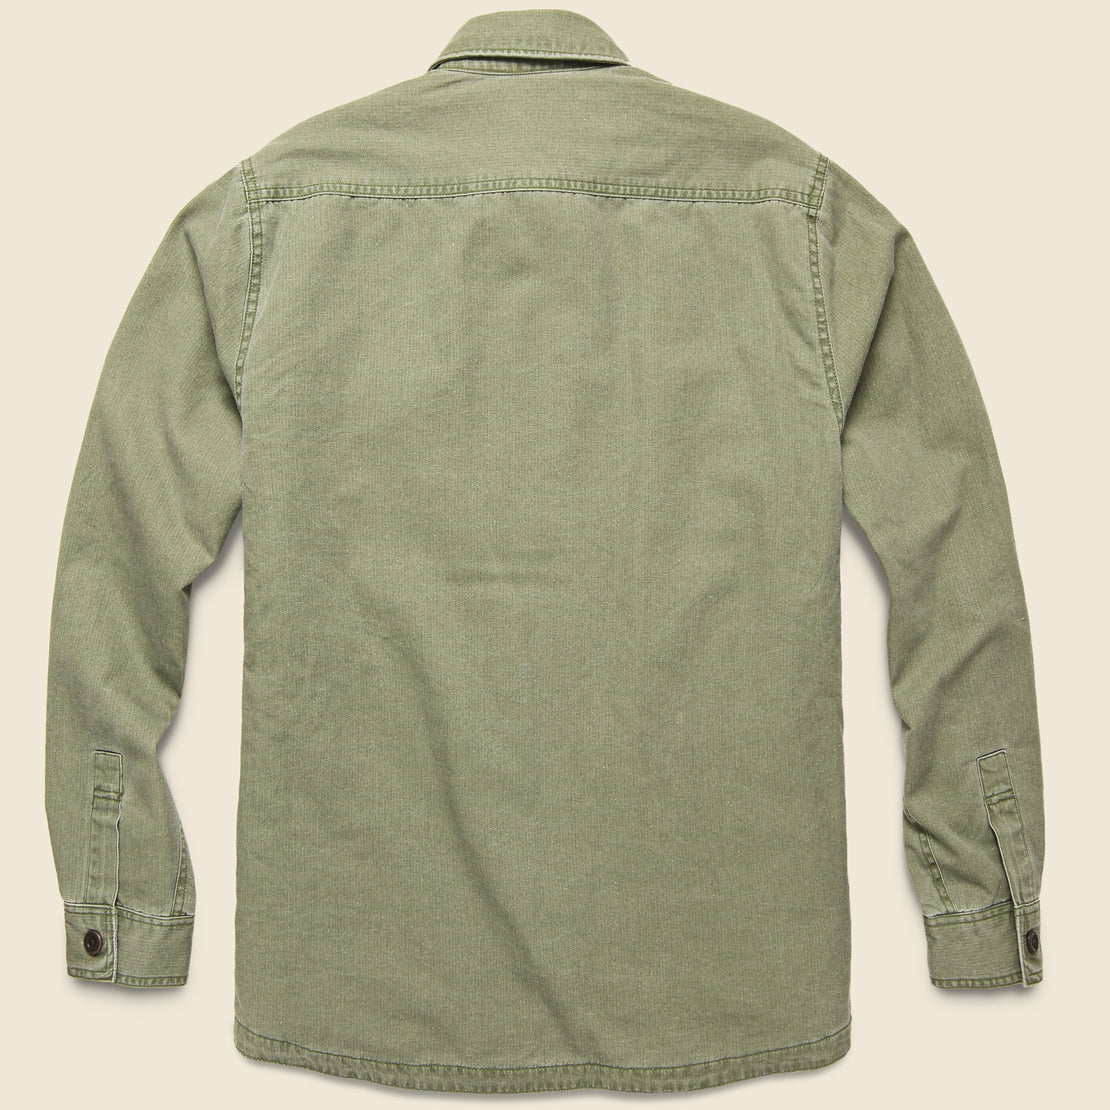 Blanket Lined CPO Shirt Jacket - Olive - Faherty - STAG Provisions - Outerwear - Shirt Jacket